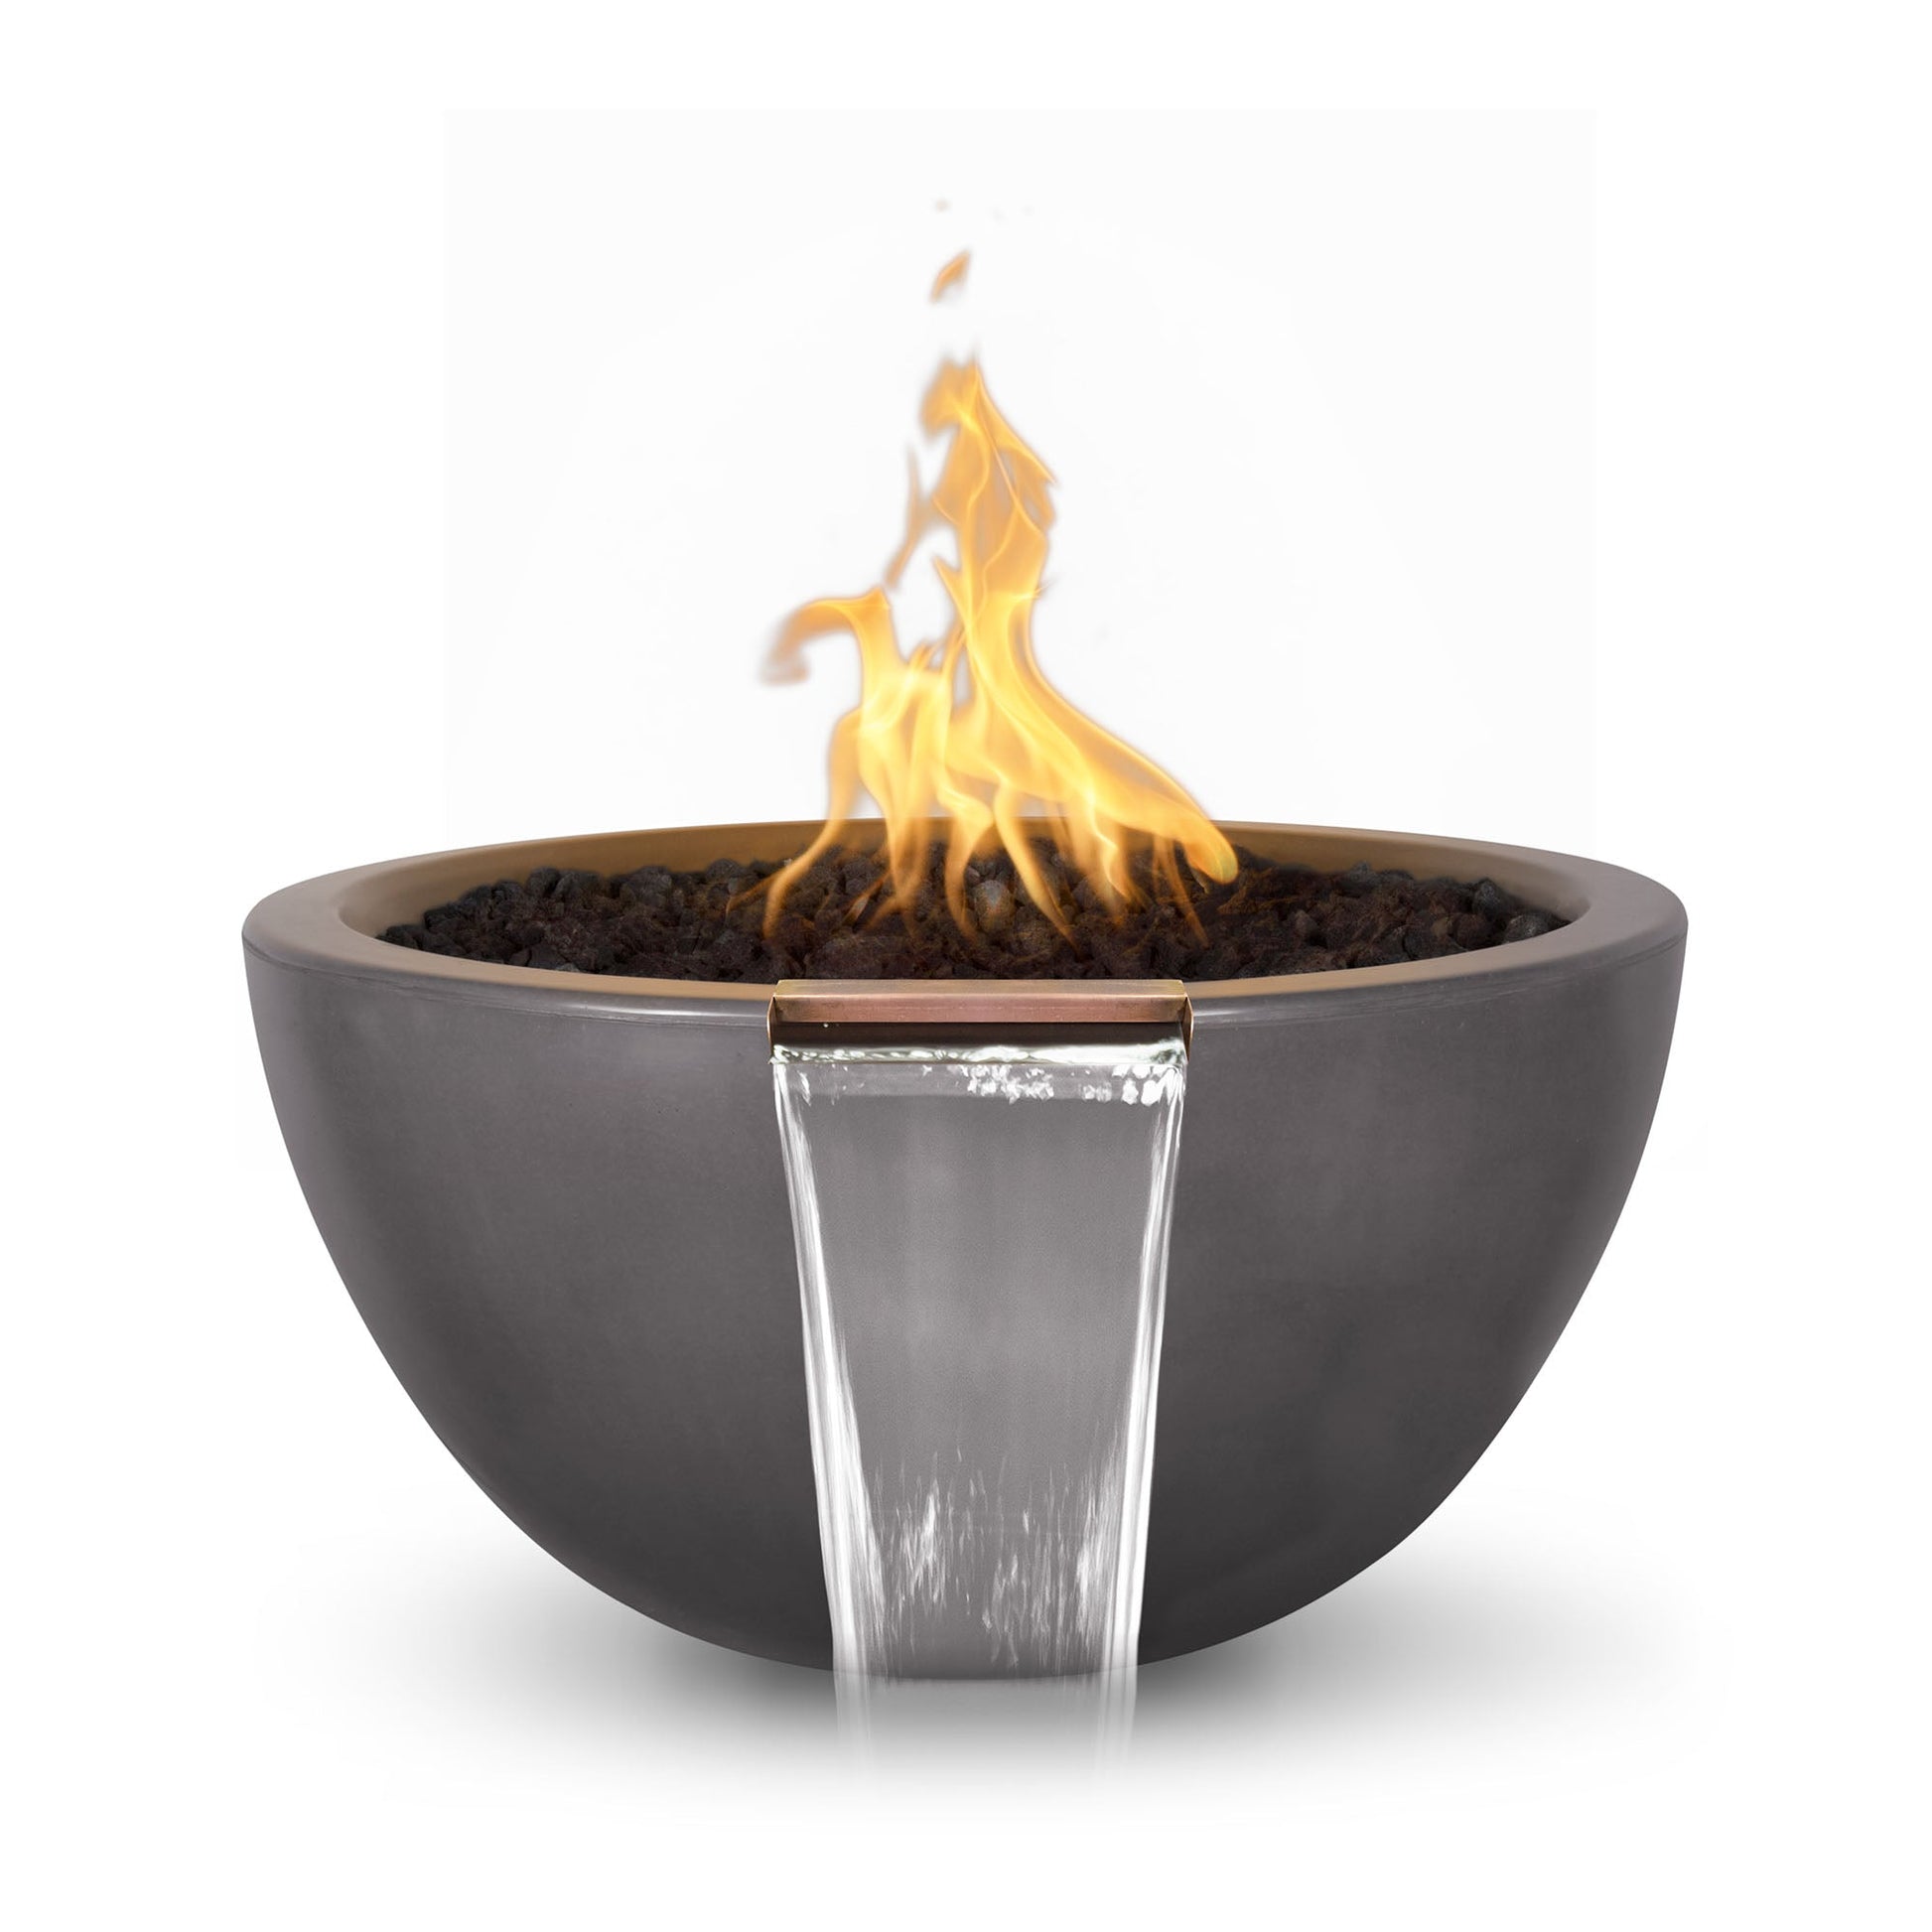 The Outdoor Plus Round Luna 30" Metallic Silver GFRC Concrete Natural Gas Fire & Water Bowl with Match Lit with Flame Sense Ignition